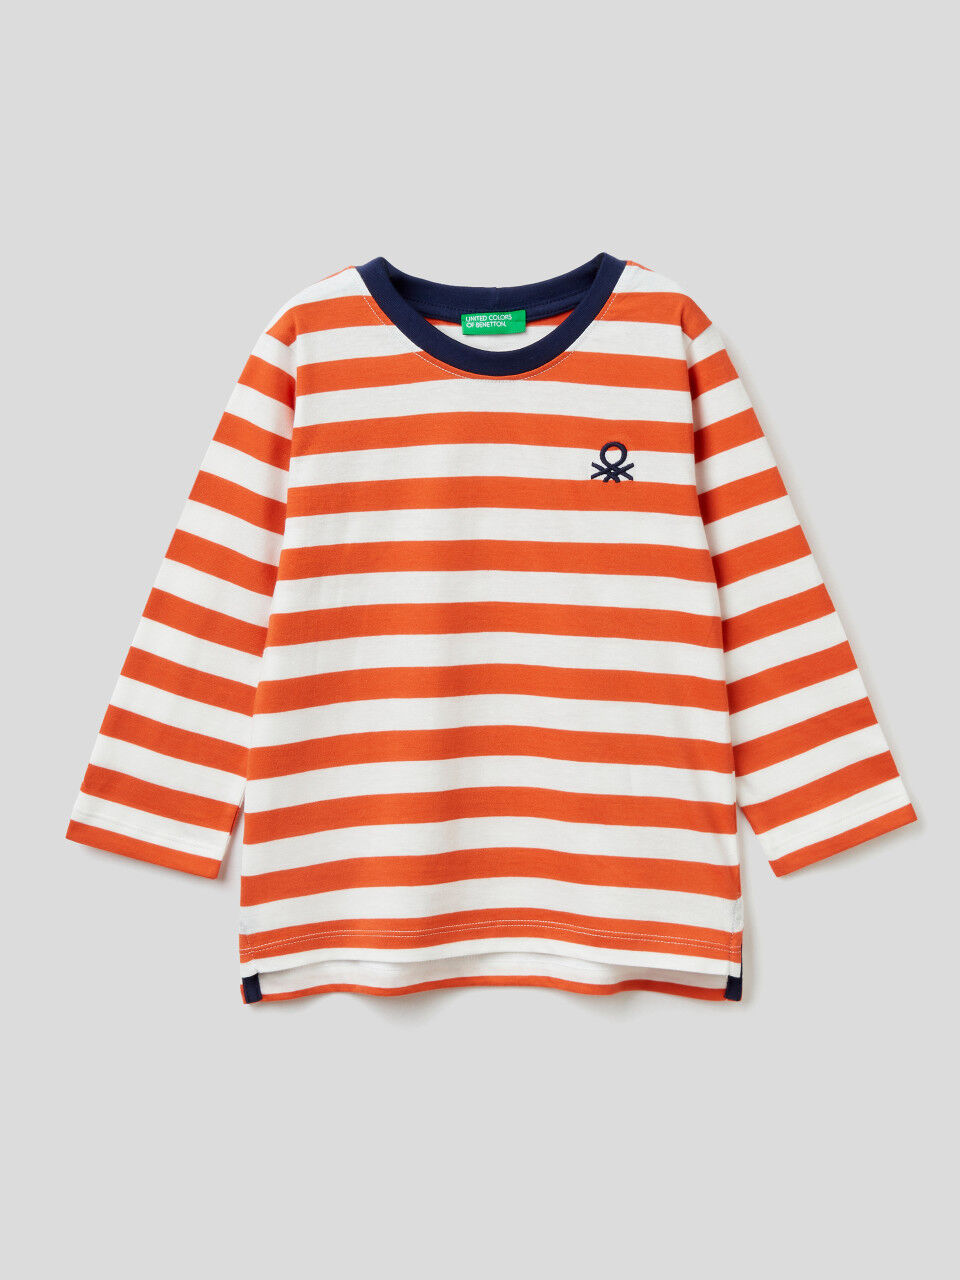 Ocean triple Sudan Kid Boys' T-shirts and Shirts Collection 2022 | Benetton